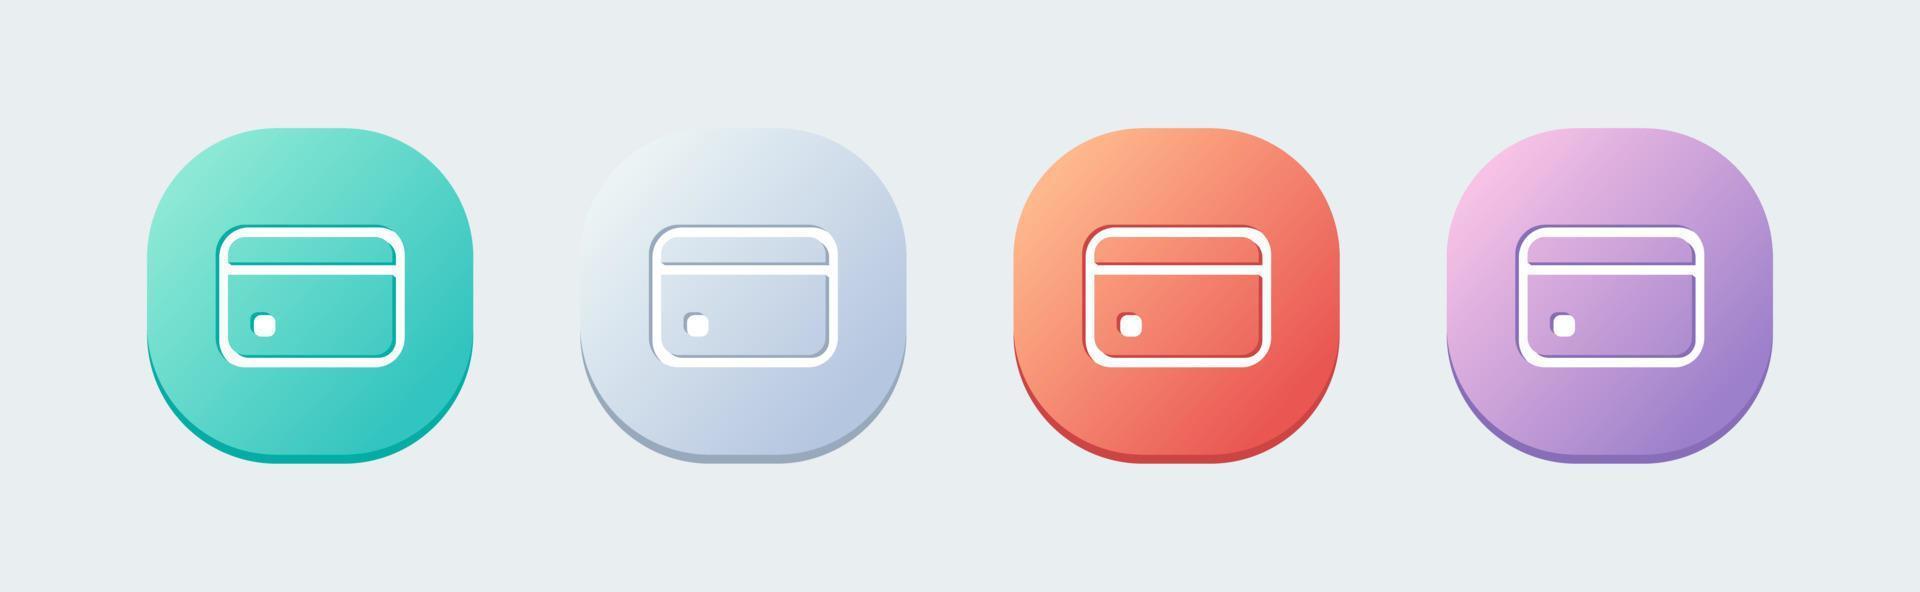 Credit card line icon in flat design style. Payment card vector illustration.